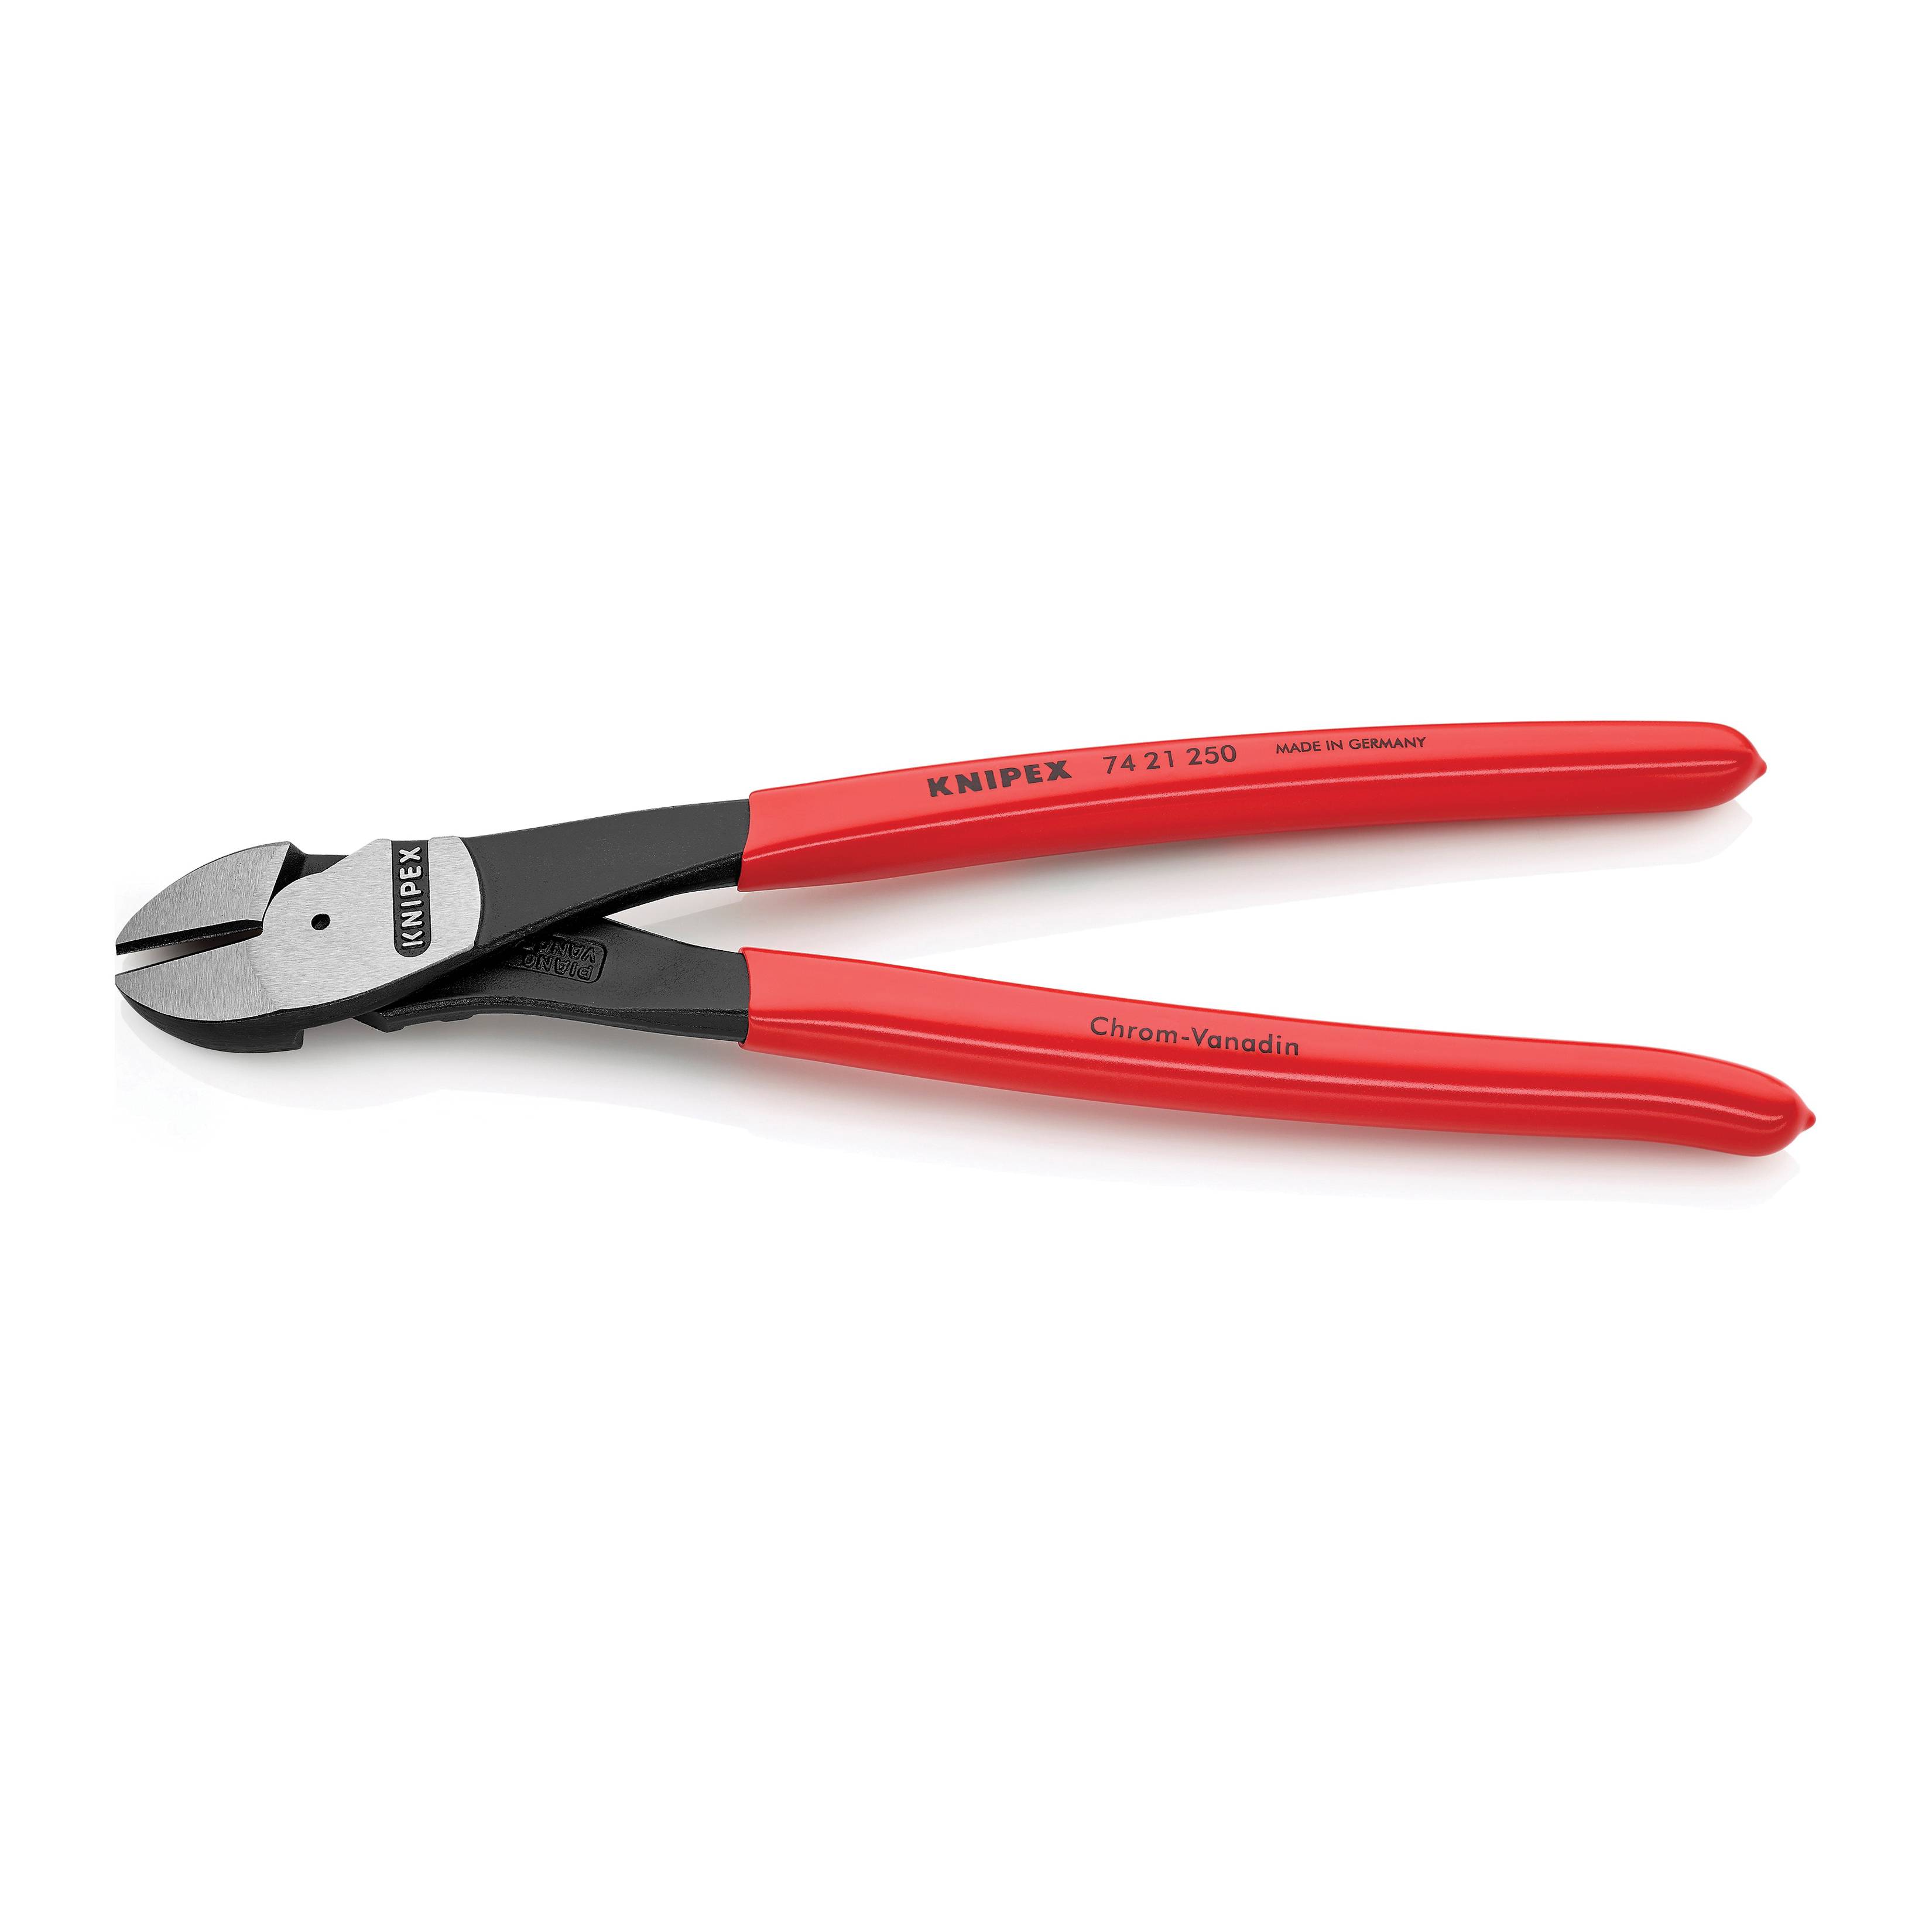 Knipex® 74 21 250 SBA High Leverage Diagonal Cutting Plier With Integrated Forged Joint Axle, 4.6 mm Medium Hard Wire Nominal, 1 in L x 1-1/8 in W Steel Beveled Jaw, 250 mm OAL